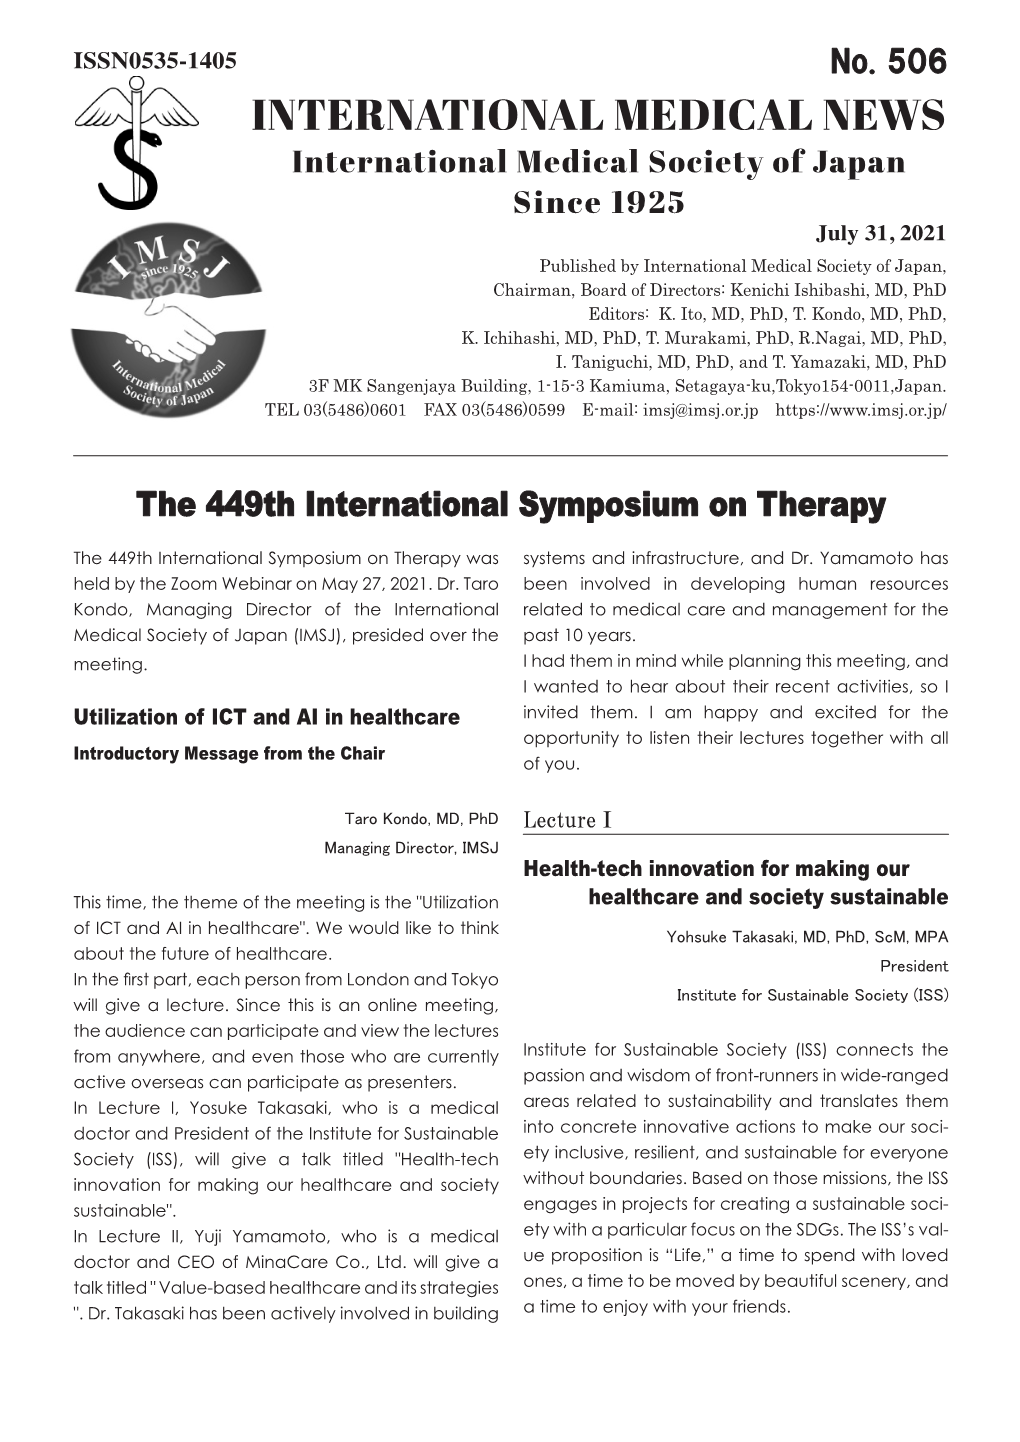 The 449Th International Symposium on Therapy